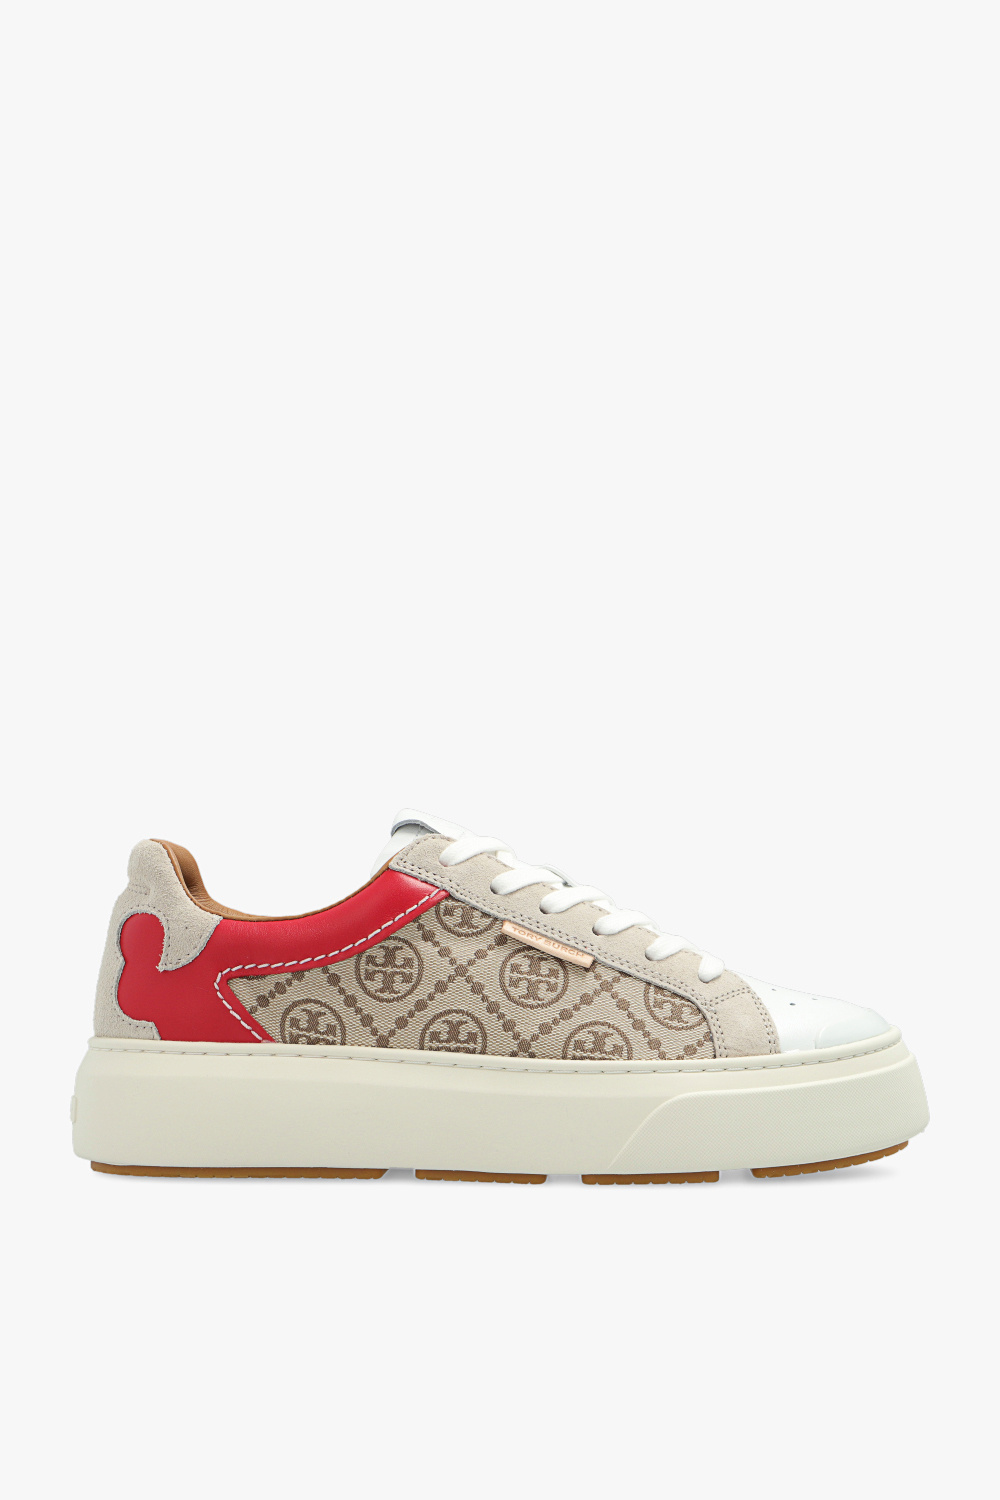 Tory Burch - Ladybug Fabric Low-top Sneakers - Female - 5